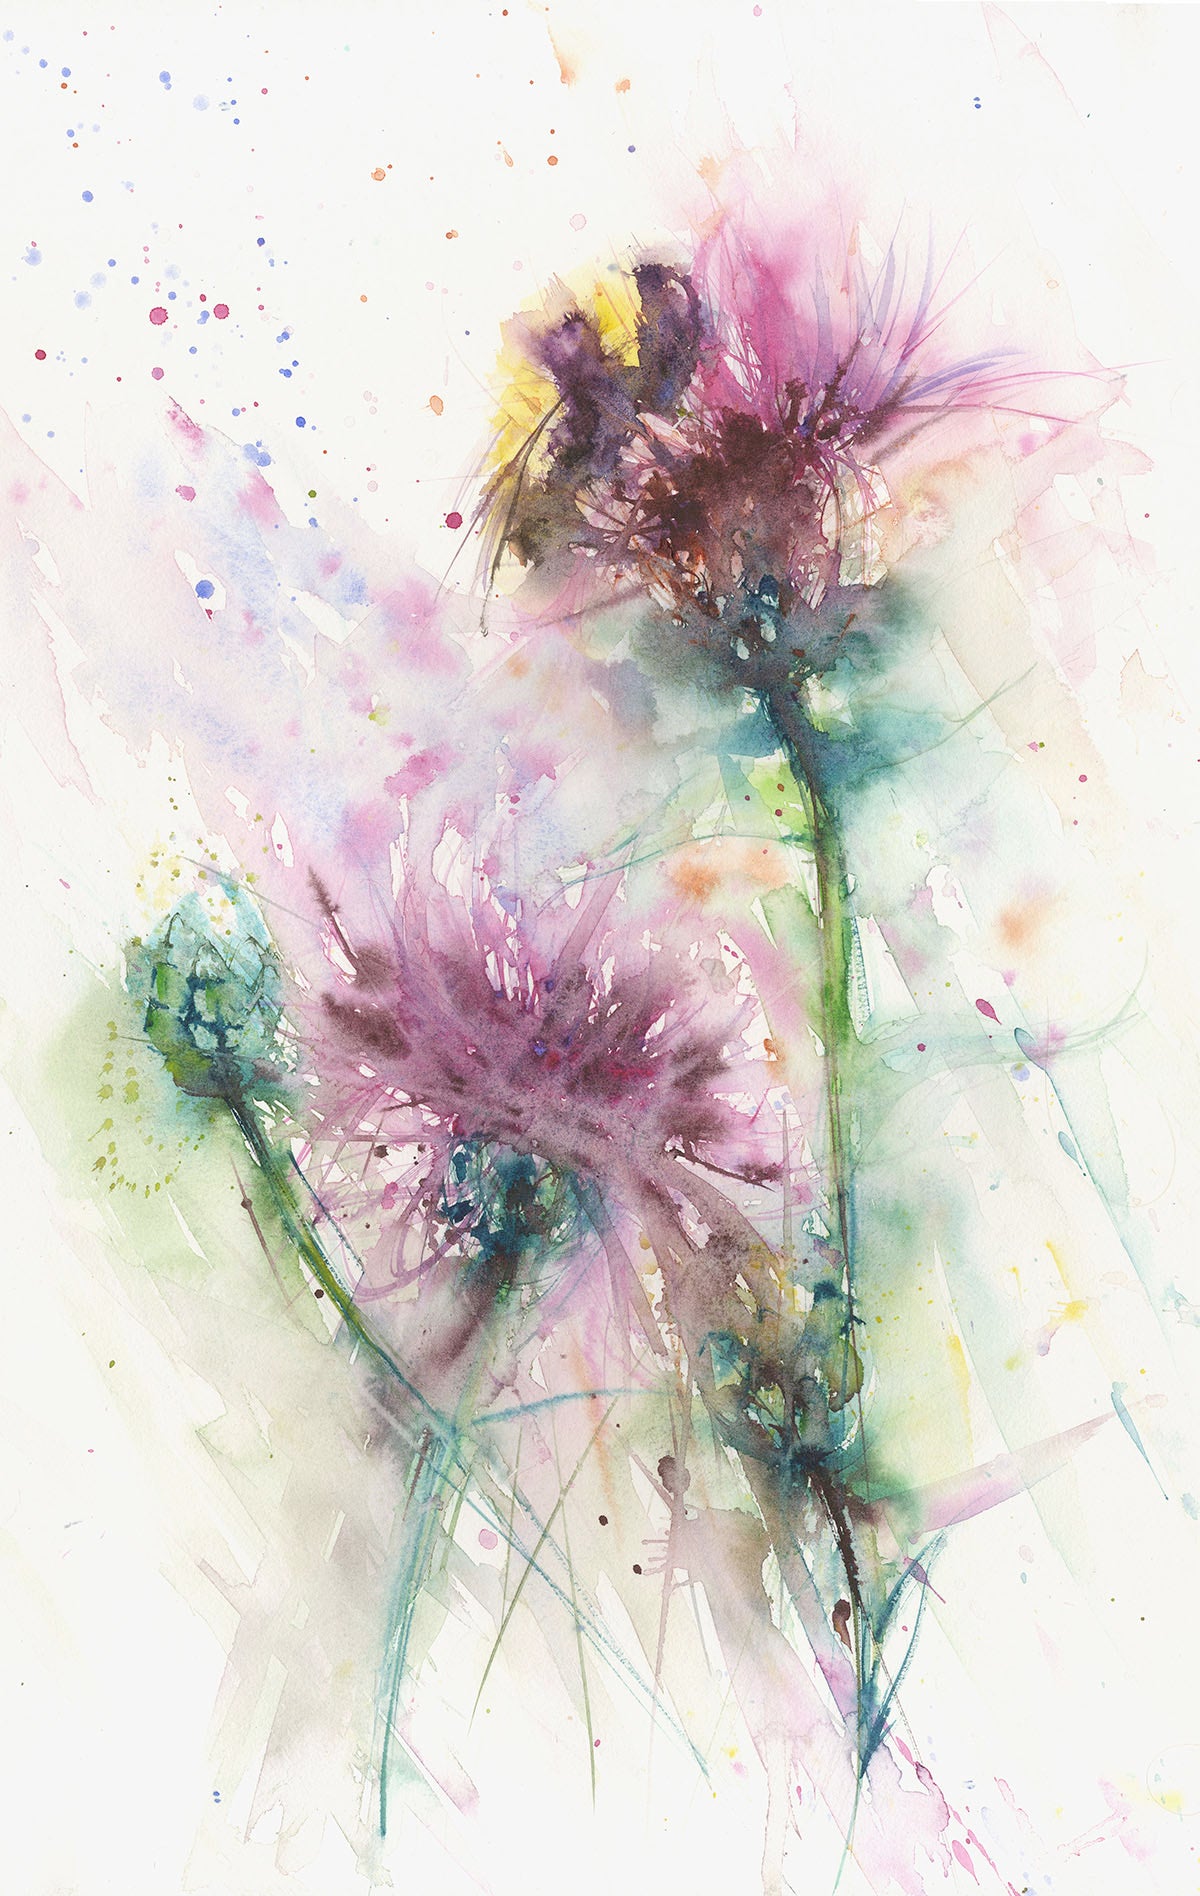 LIMITED EDITON PRINT of my original Bumble bee on a knapweed - Jen Buckley Art limited edition animal art prints